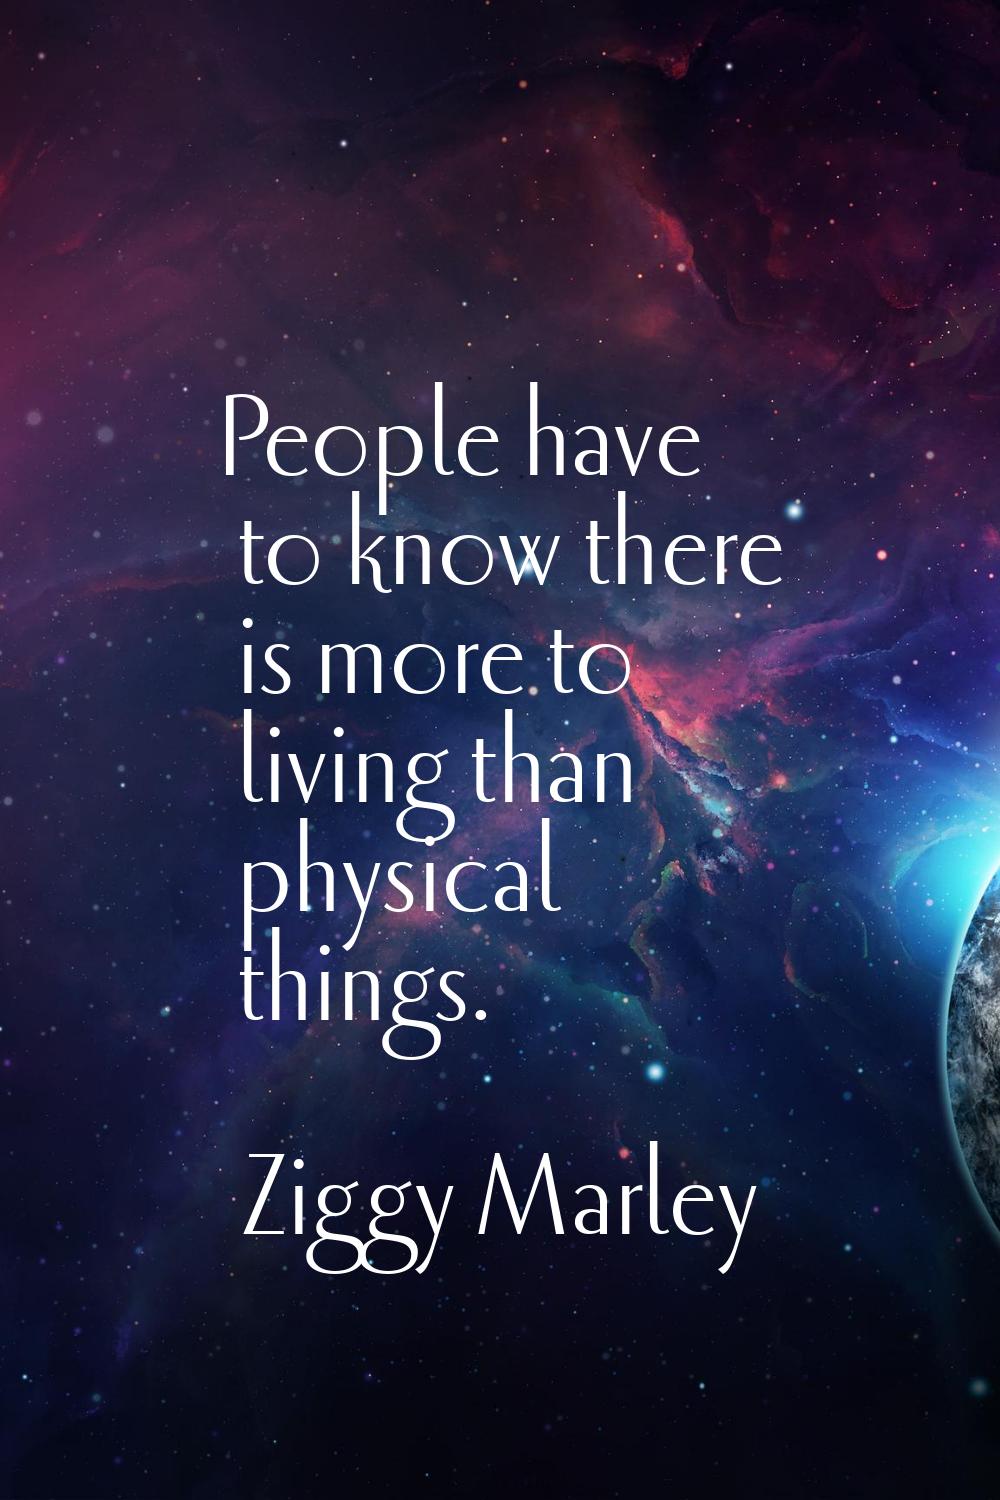 People have to know there is more to living than physical things.